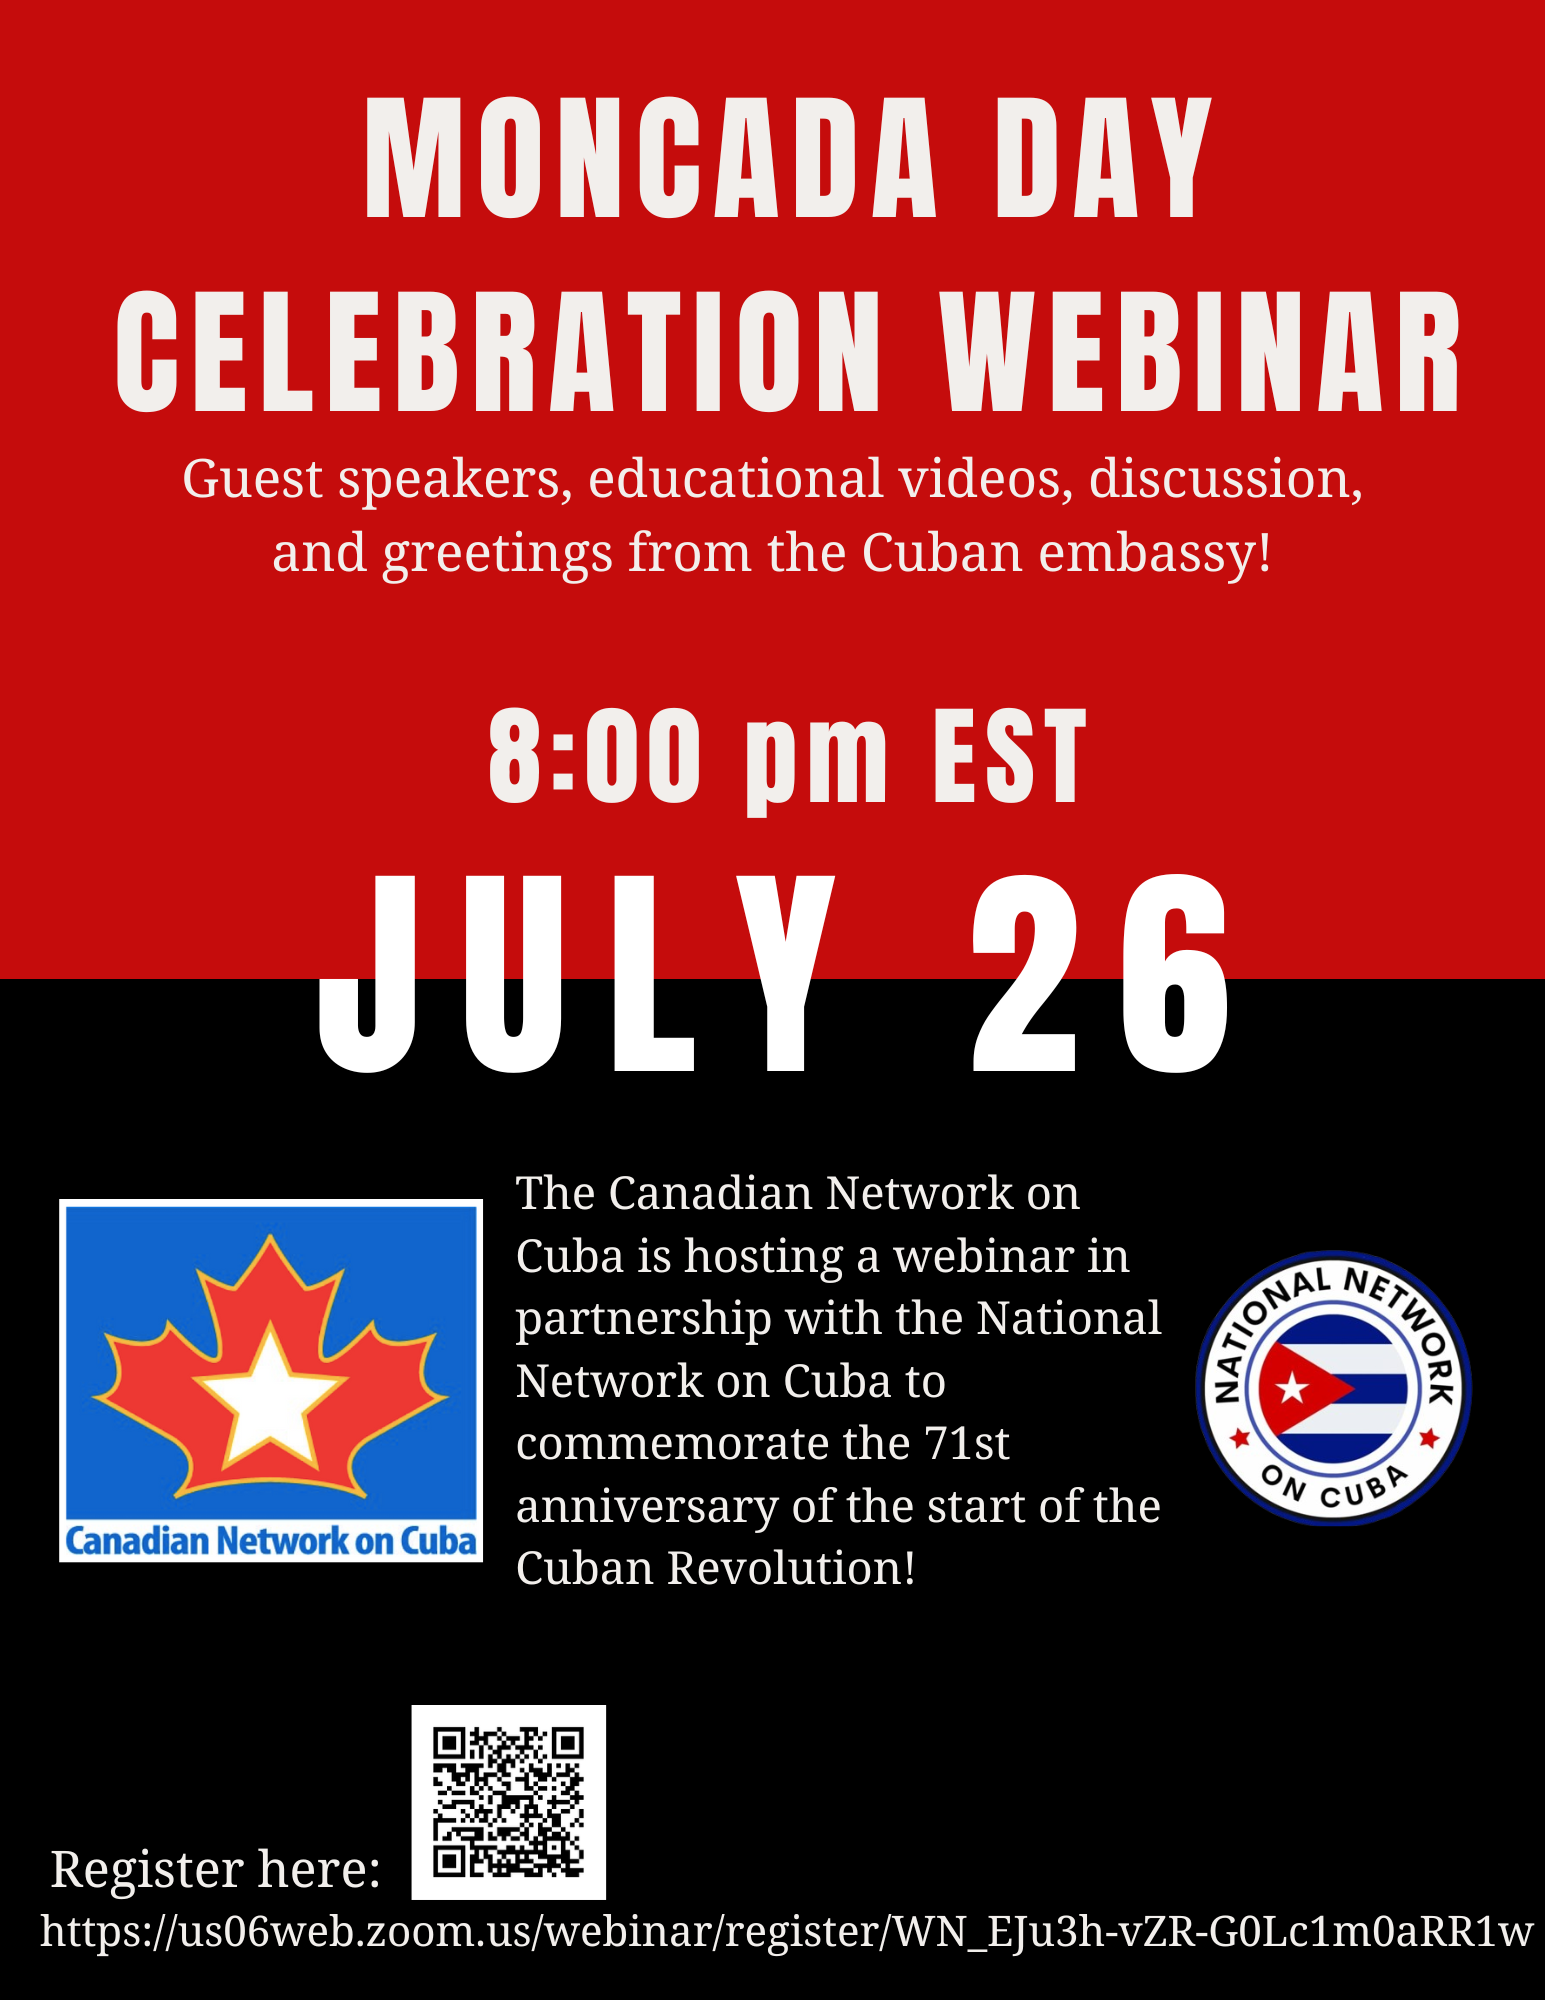 CNC WEBINAR: The CNC Celebrates MONCADA DAY on July 26th at 8pm EST on Zoom